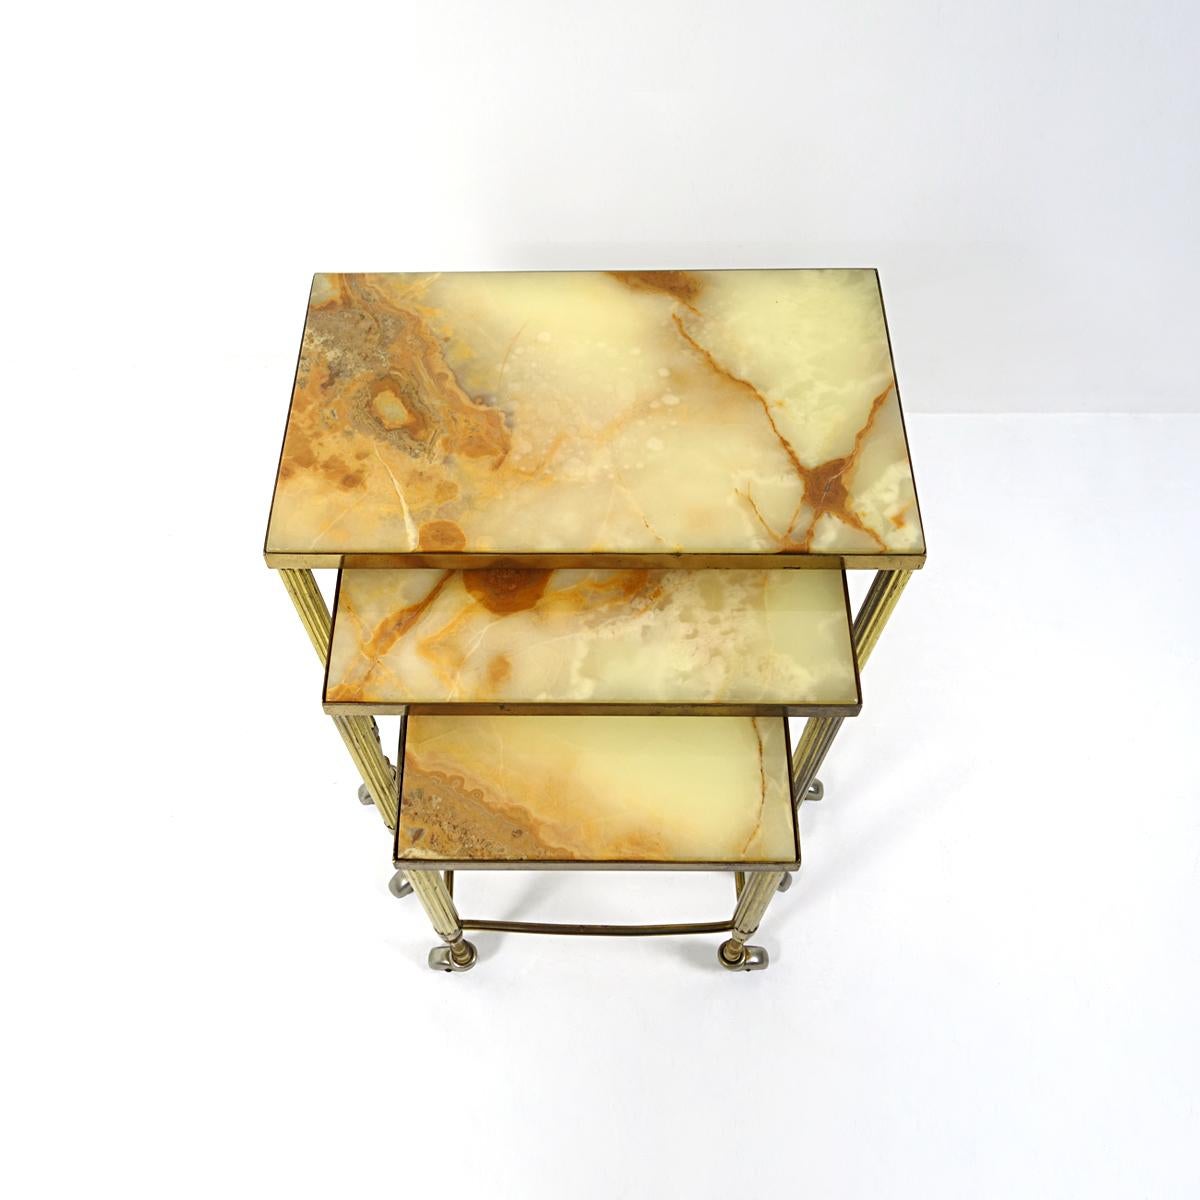 20th Century Hollywood Regency Nesting Tables on Wheels Made of Brass With Marble Tops For Sale